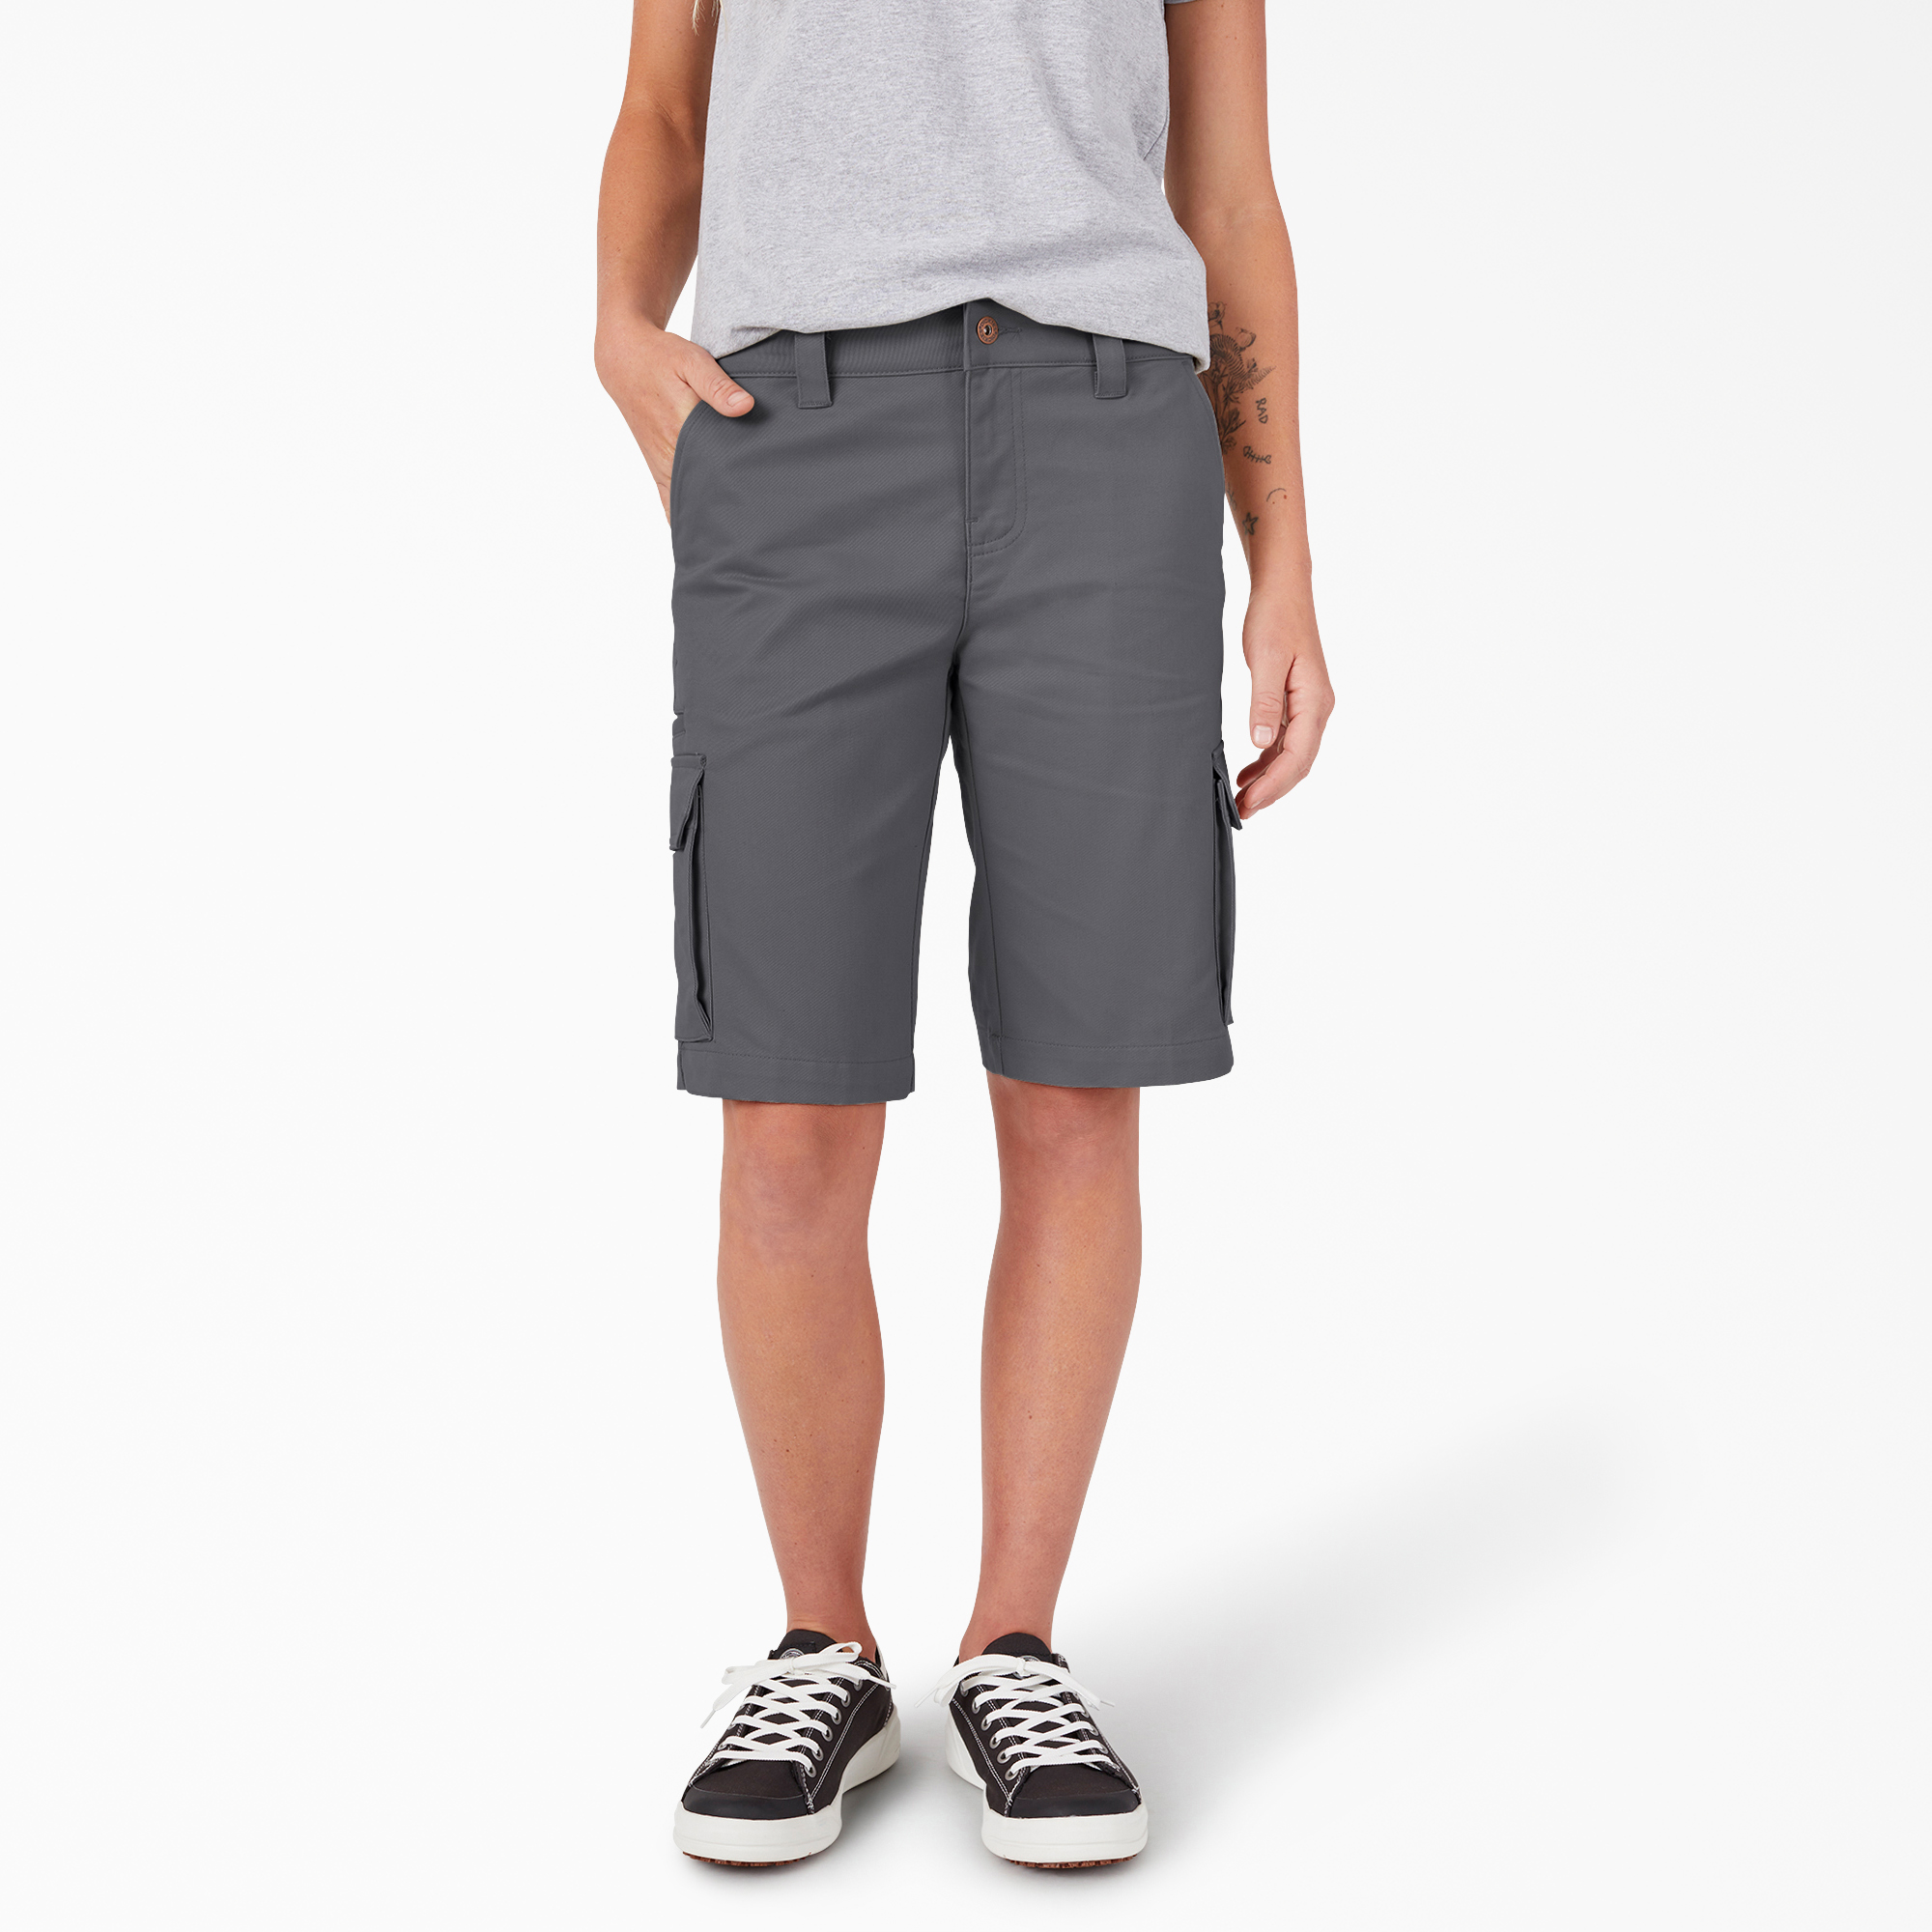 Women's 11" Stretch Relaxed Fit Cargo Shorts - Graphite Gray (GA)